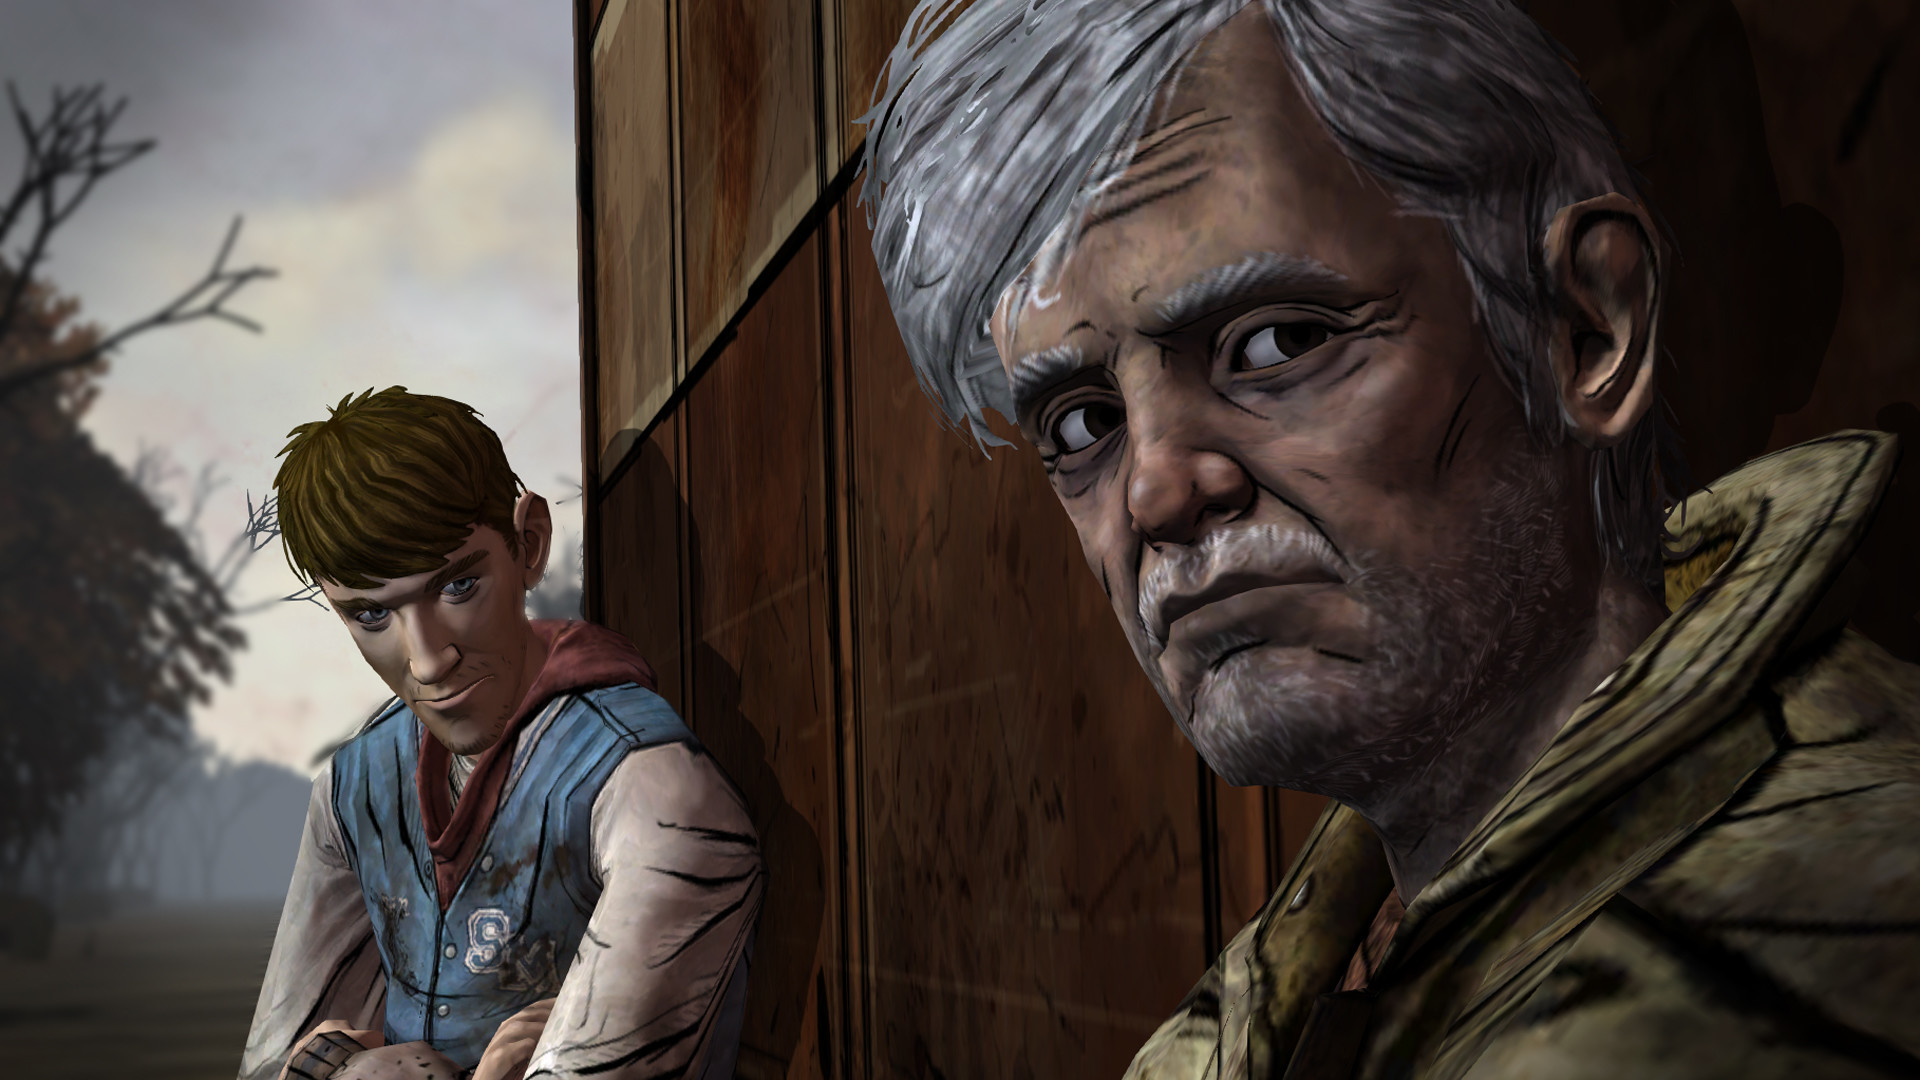 1920x1080 From Telltale Games and Skybound Entertainment based on Robert Kirkman's  best-selling comic book series and graphic novels